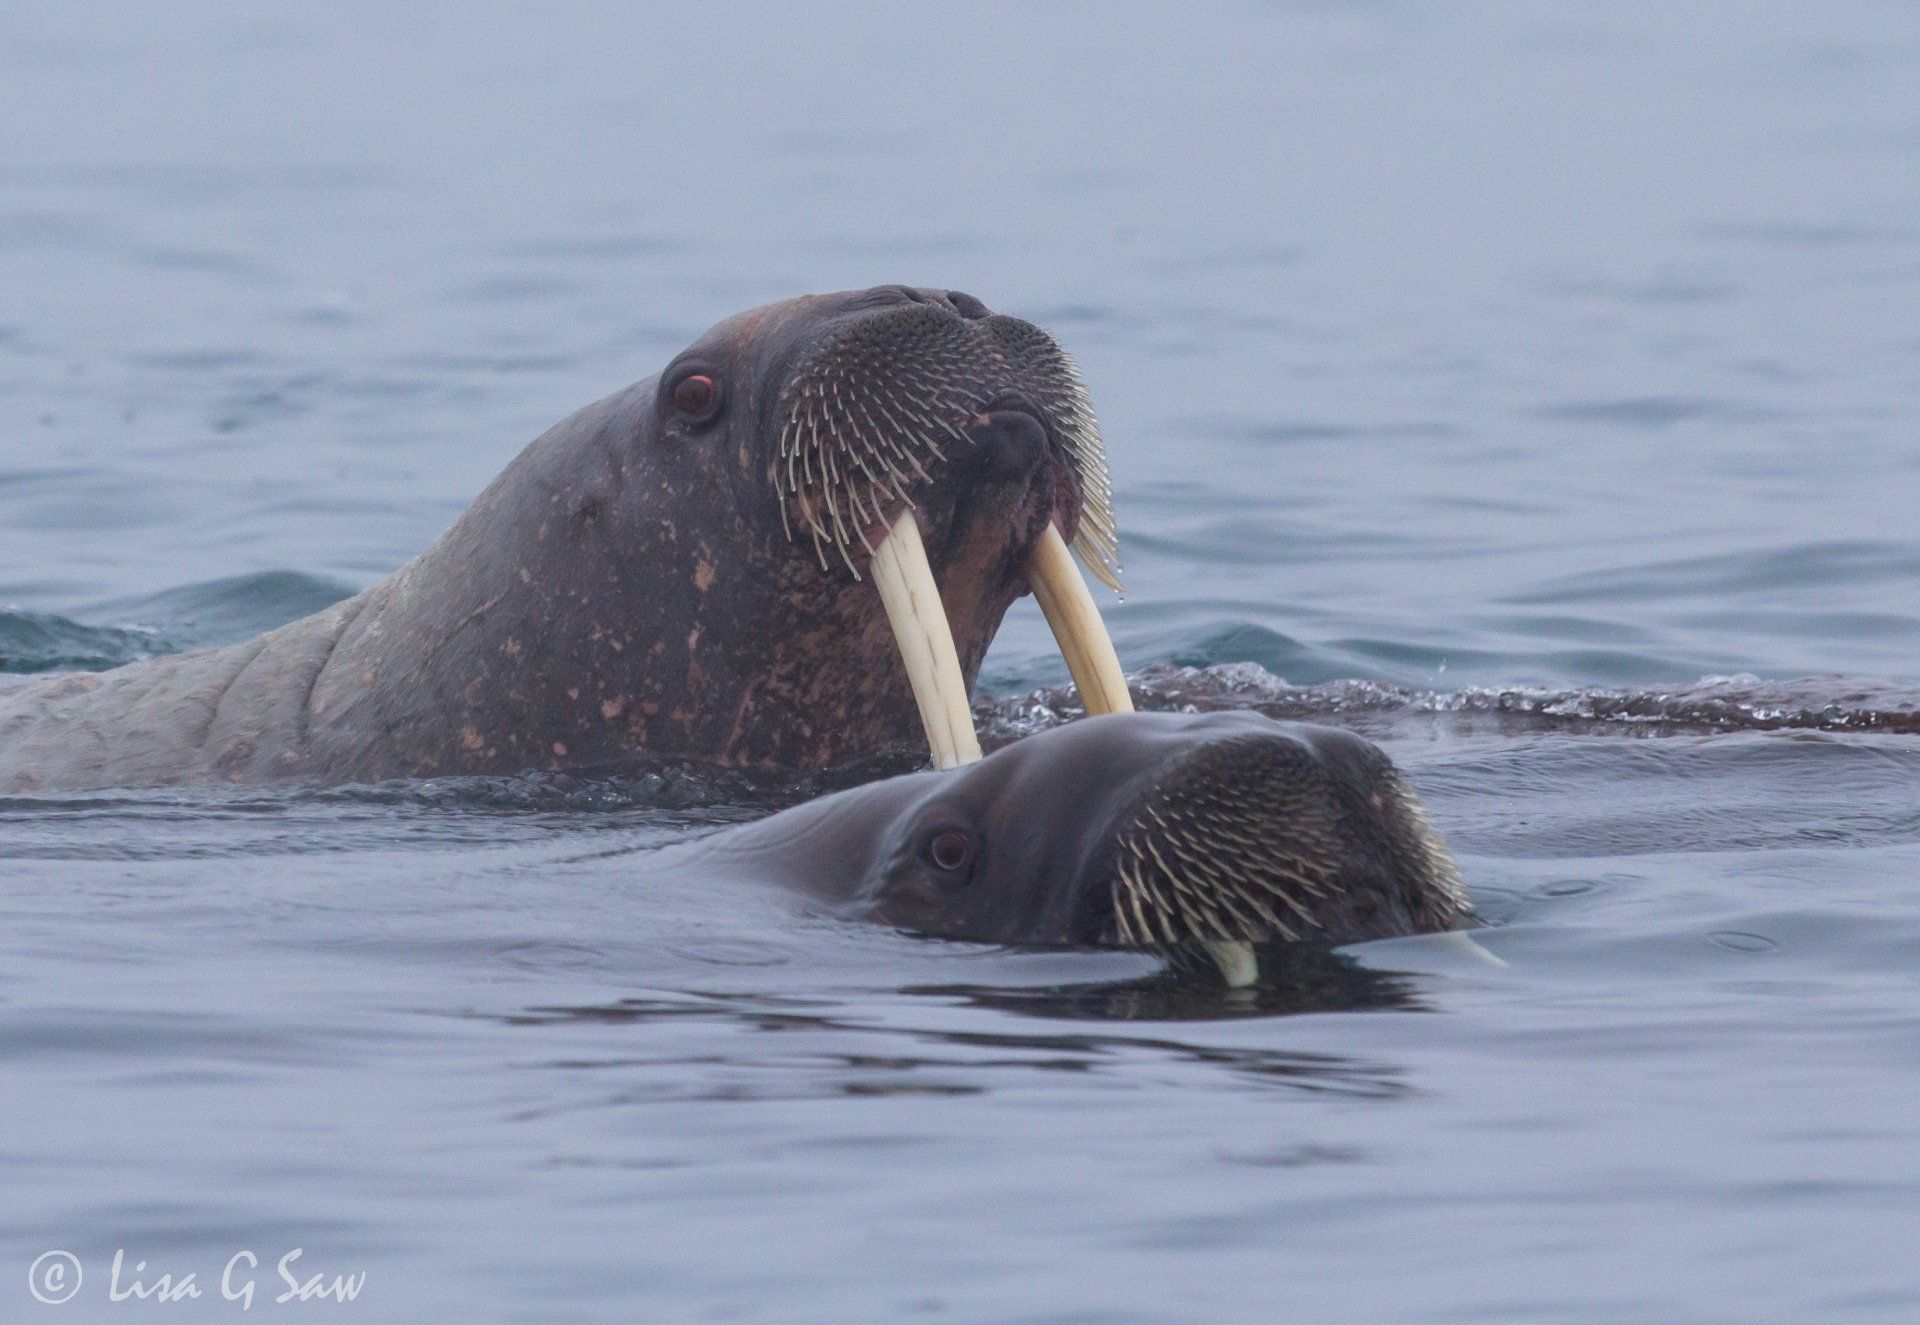 Two Walrus, looks like one's impaling other with its tusks